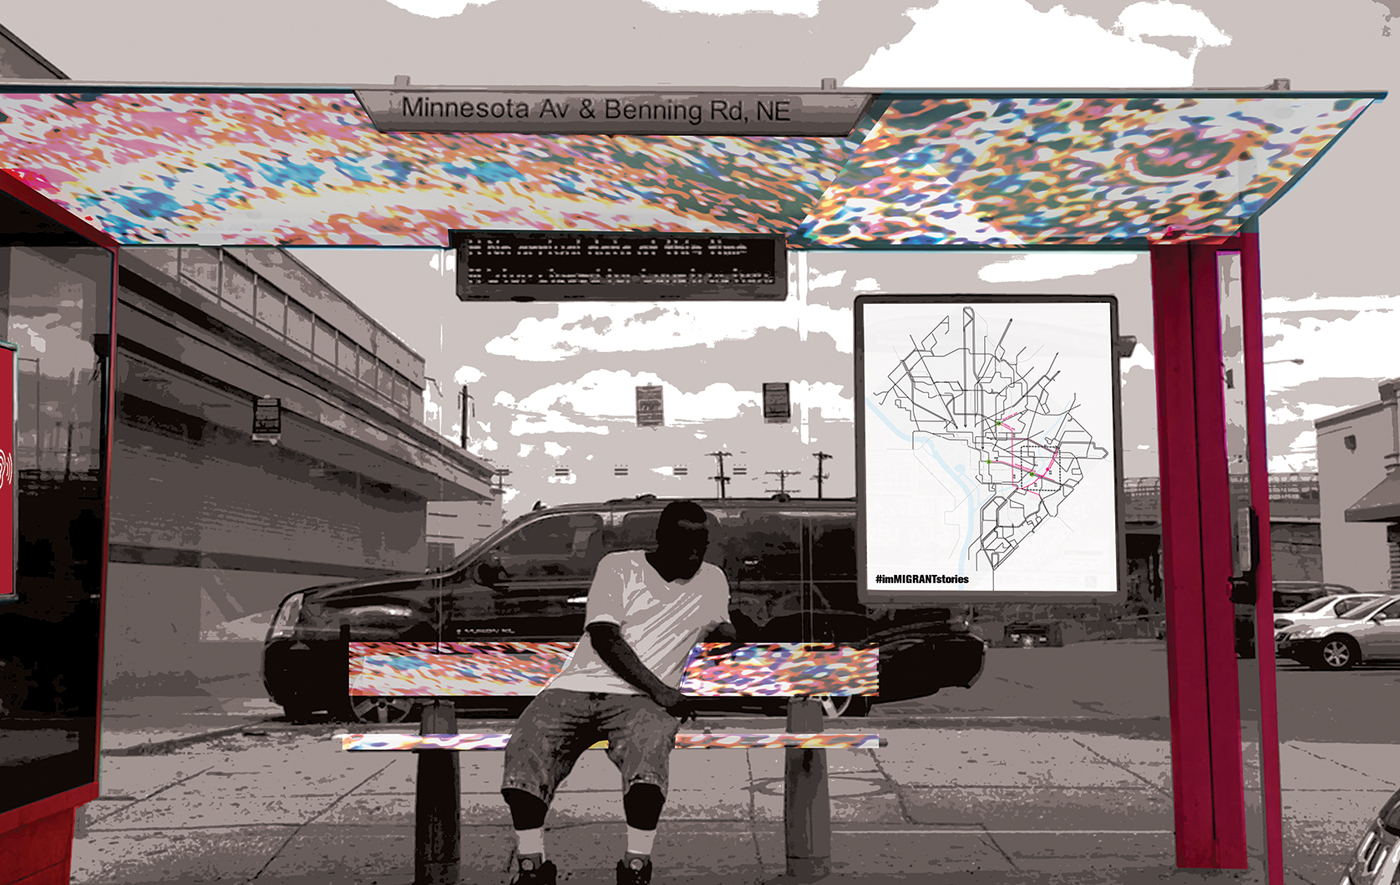 This image shows one of the ways to enter the Im(migrant) memorial through an artistically enhanced bus shelter with a capacitive speaker and a unique bus route map that identifies of the memorial loop of The Im(migrant).